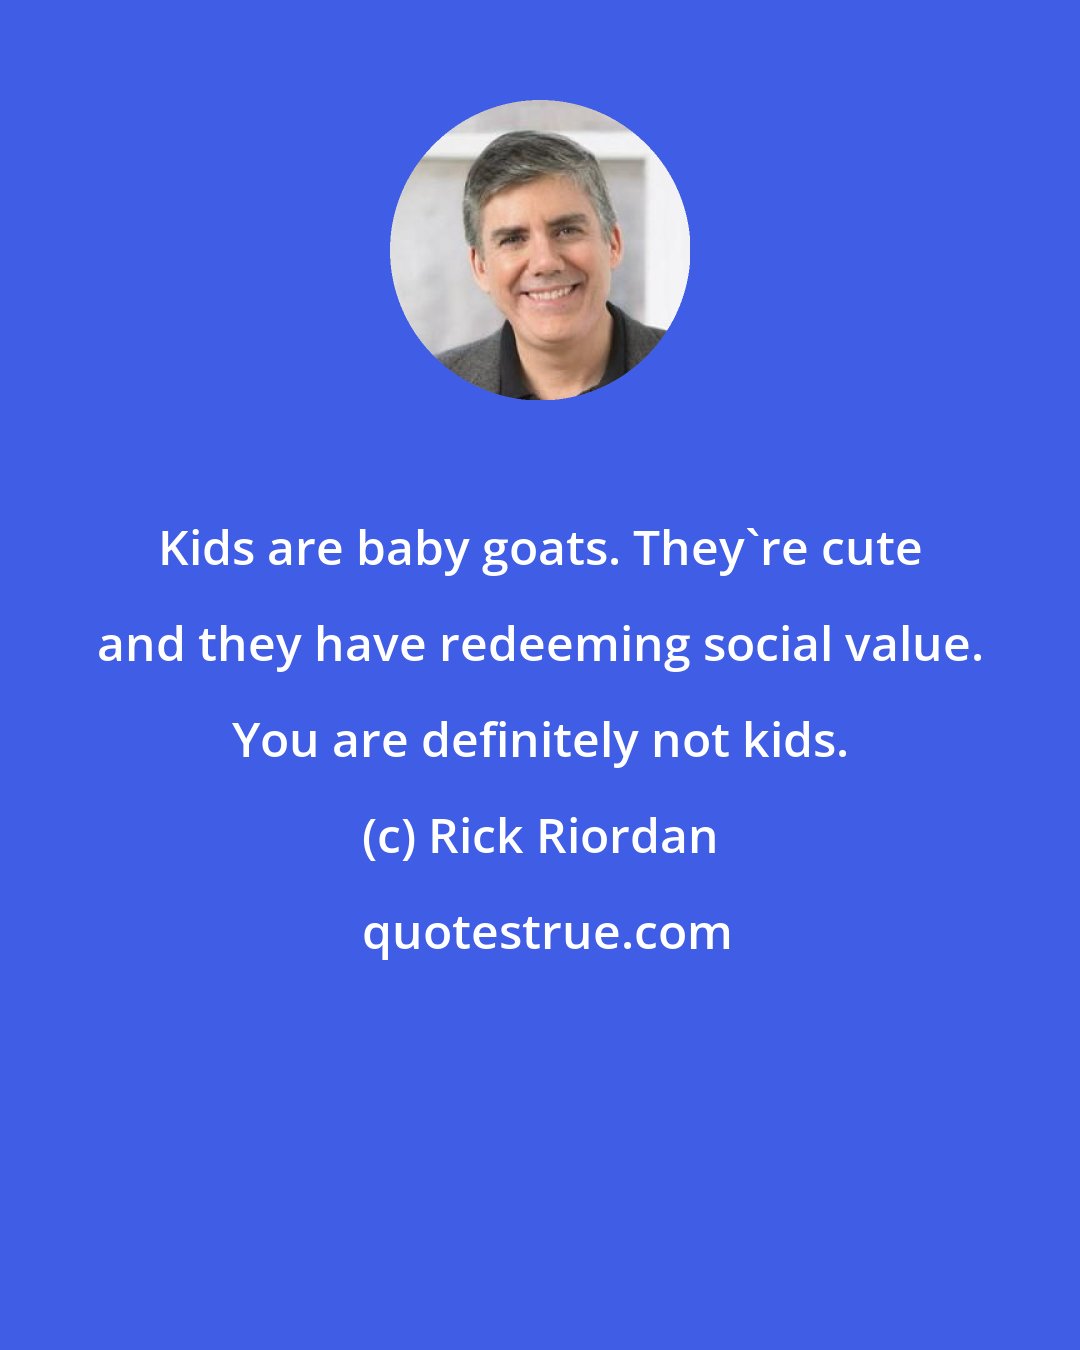 Rick Riordan: Kids are baby goats. They're cute and they have redeeming social value. You are definitely not kids.